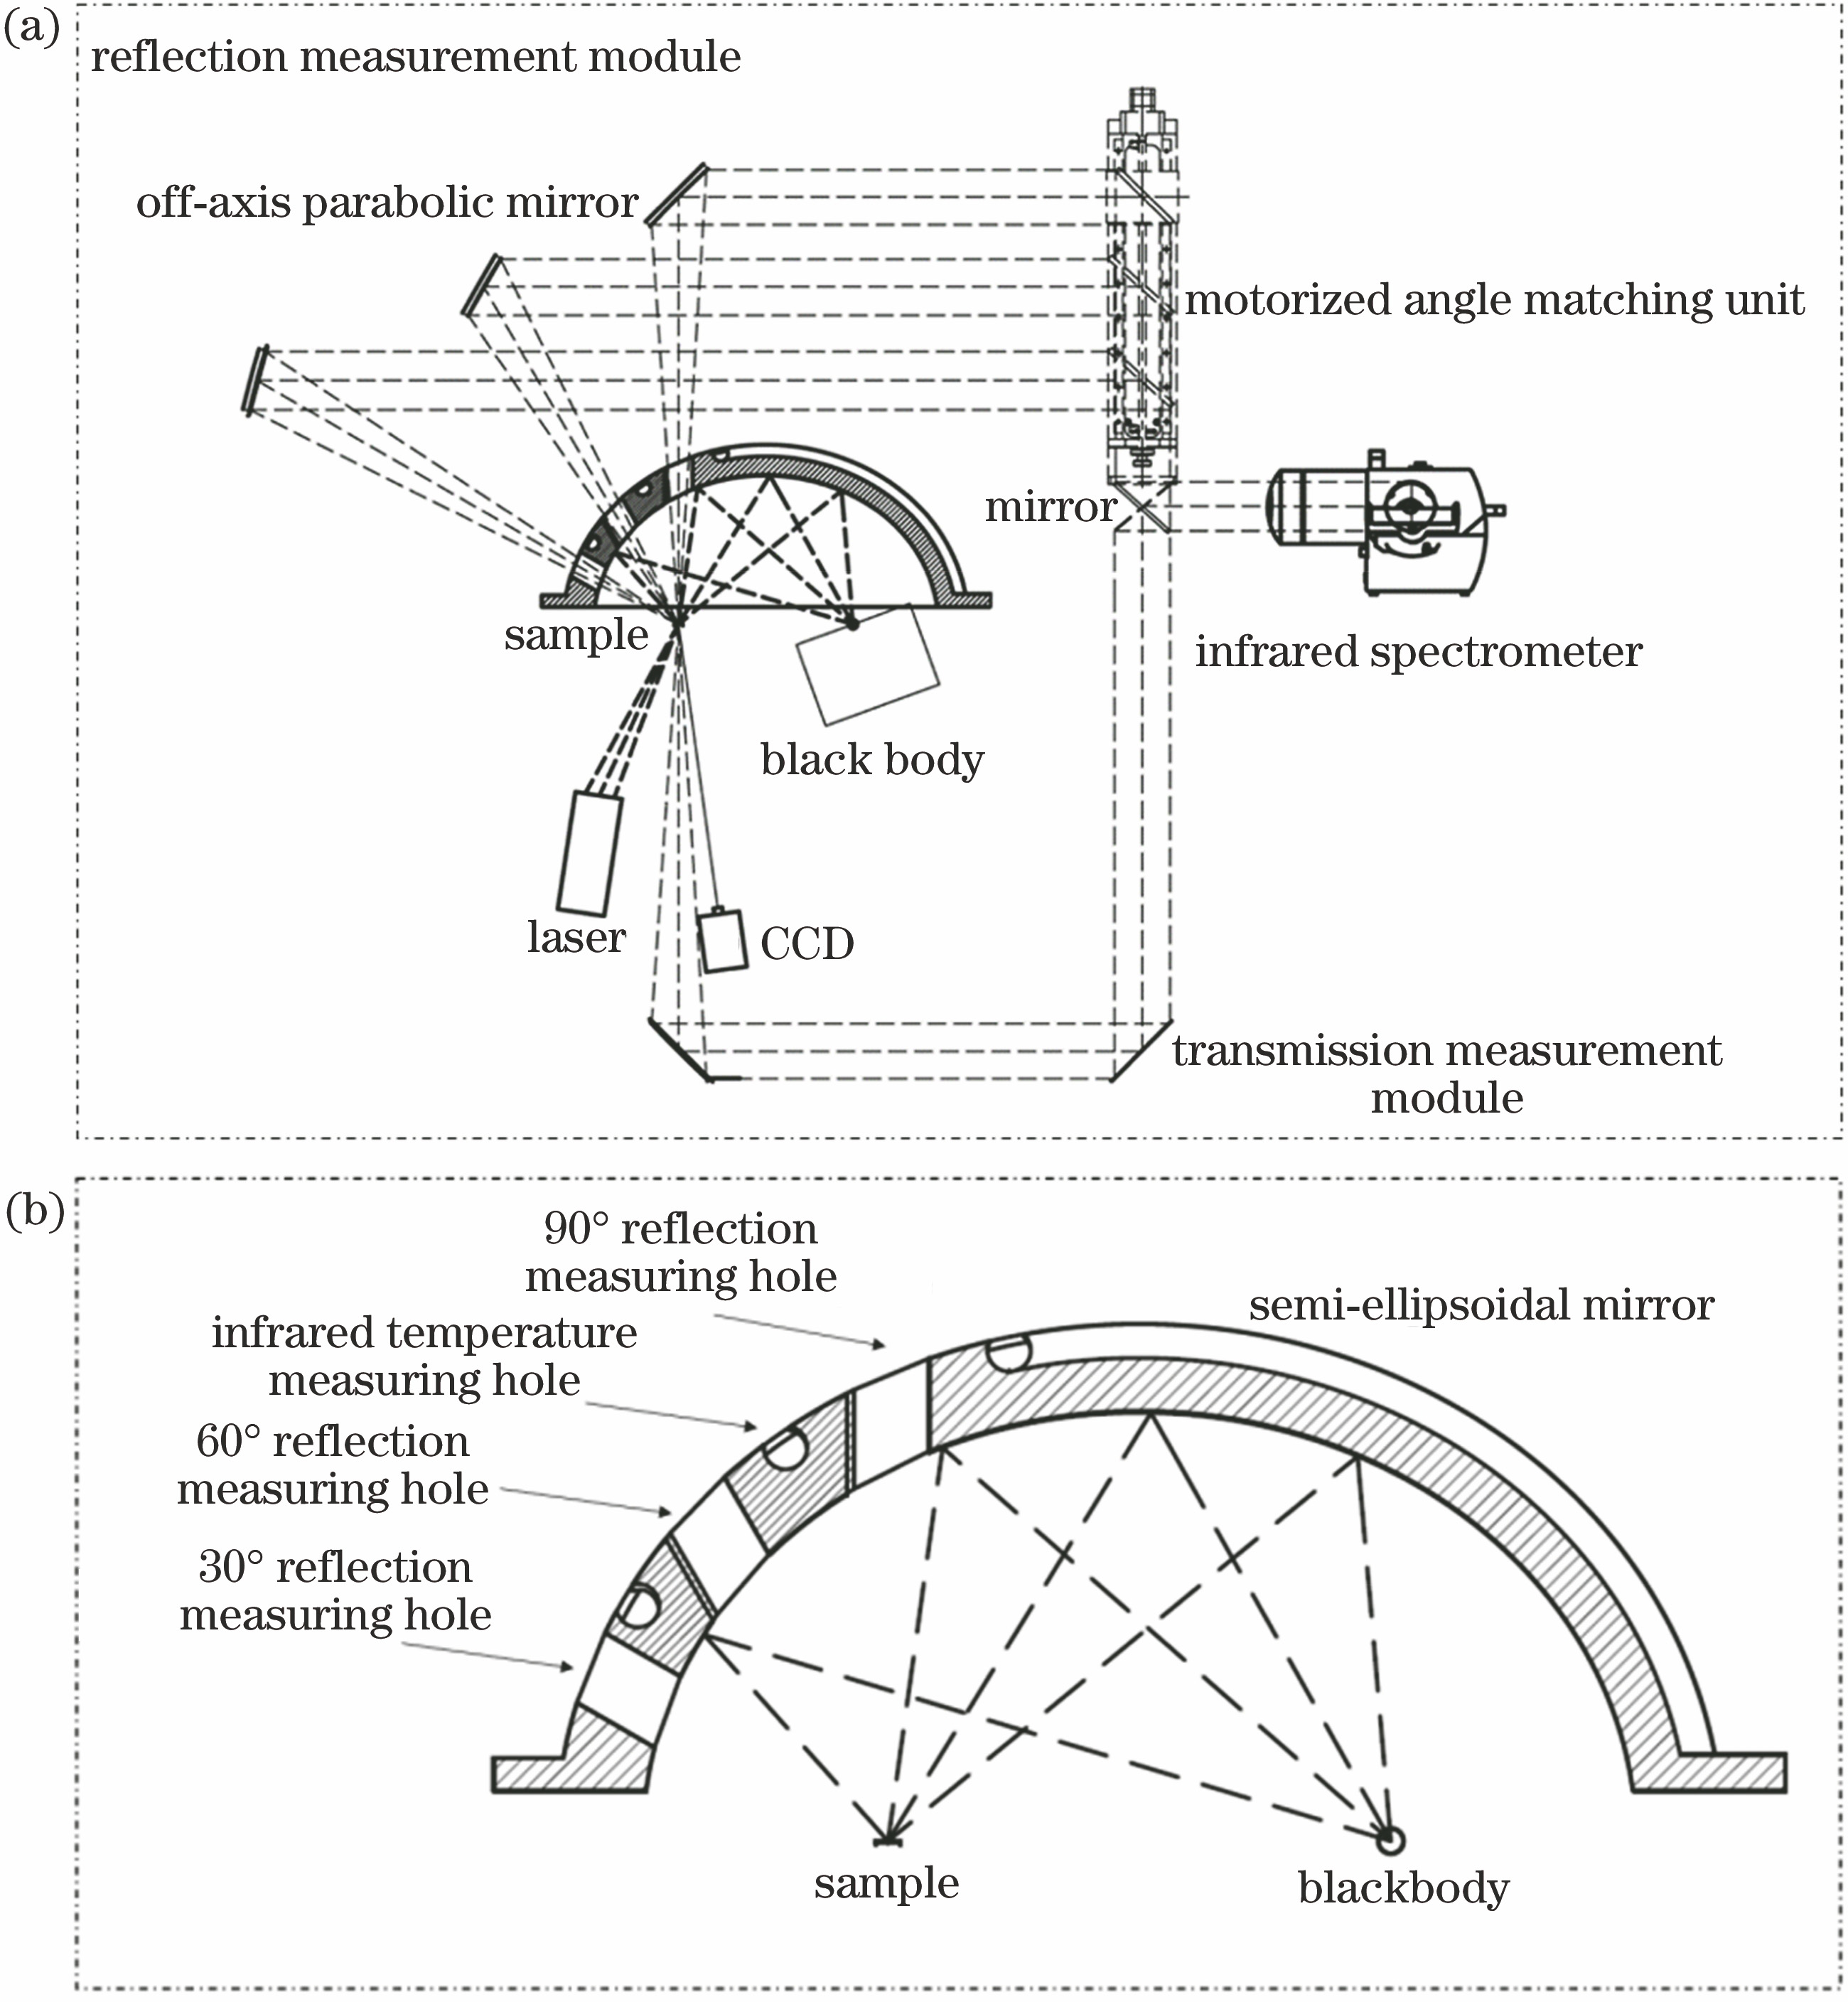 Layout of measuring devices. (a) Devices for measuring spectral emissivity of high-temperature materials; (b) 800 nm semi-ellipsoidal mirror